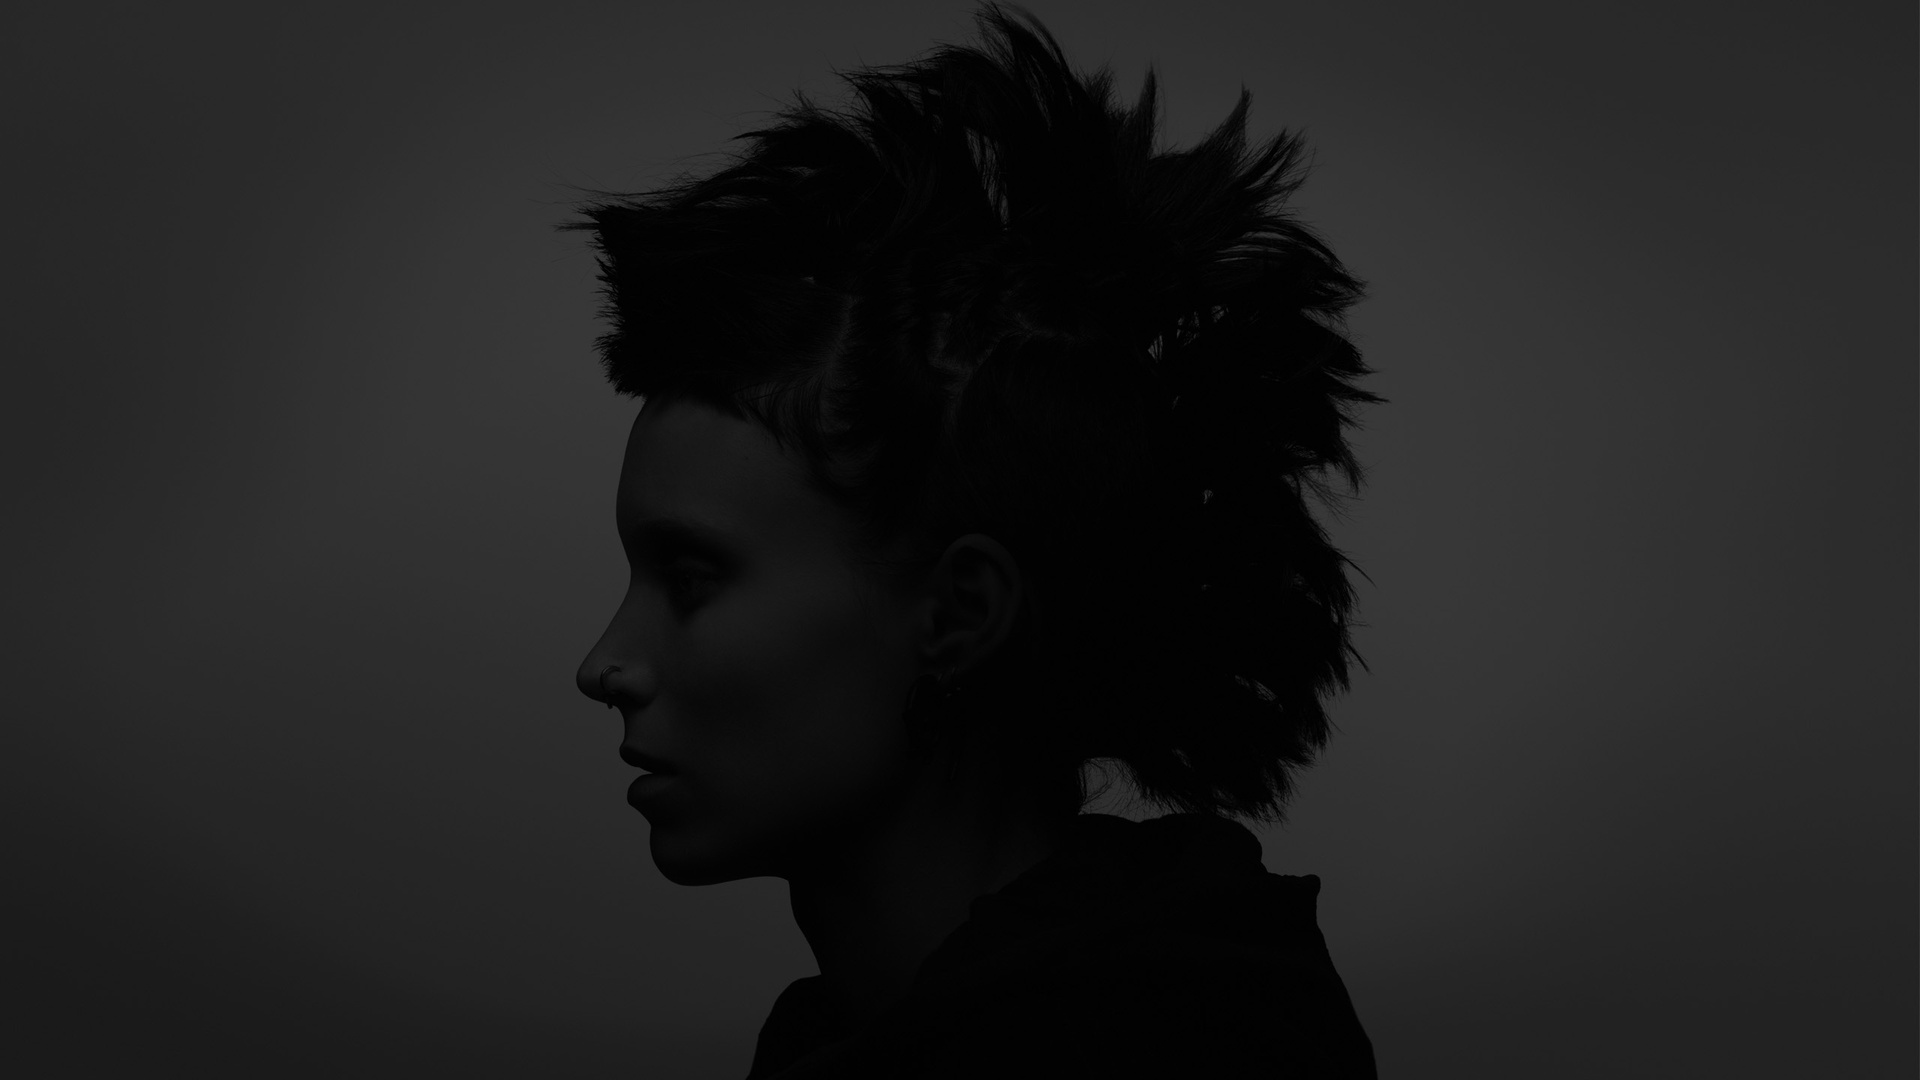 Movie The Girl With The Dragon Tattoo HD Wallpaper | Background Image